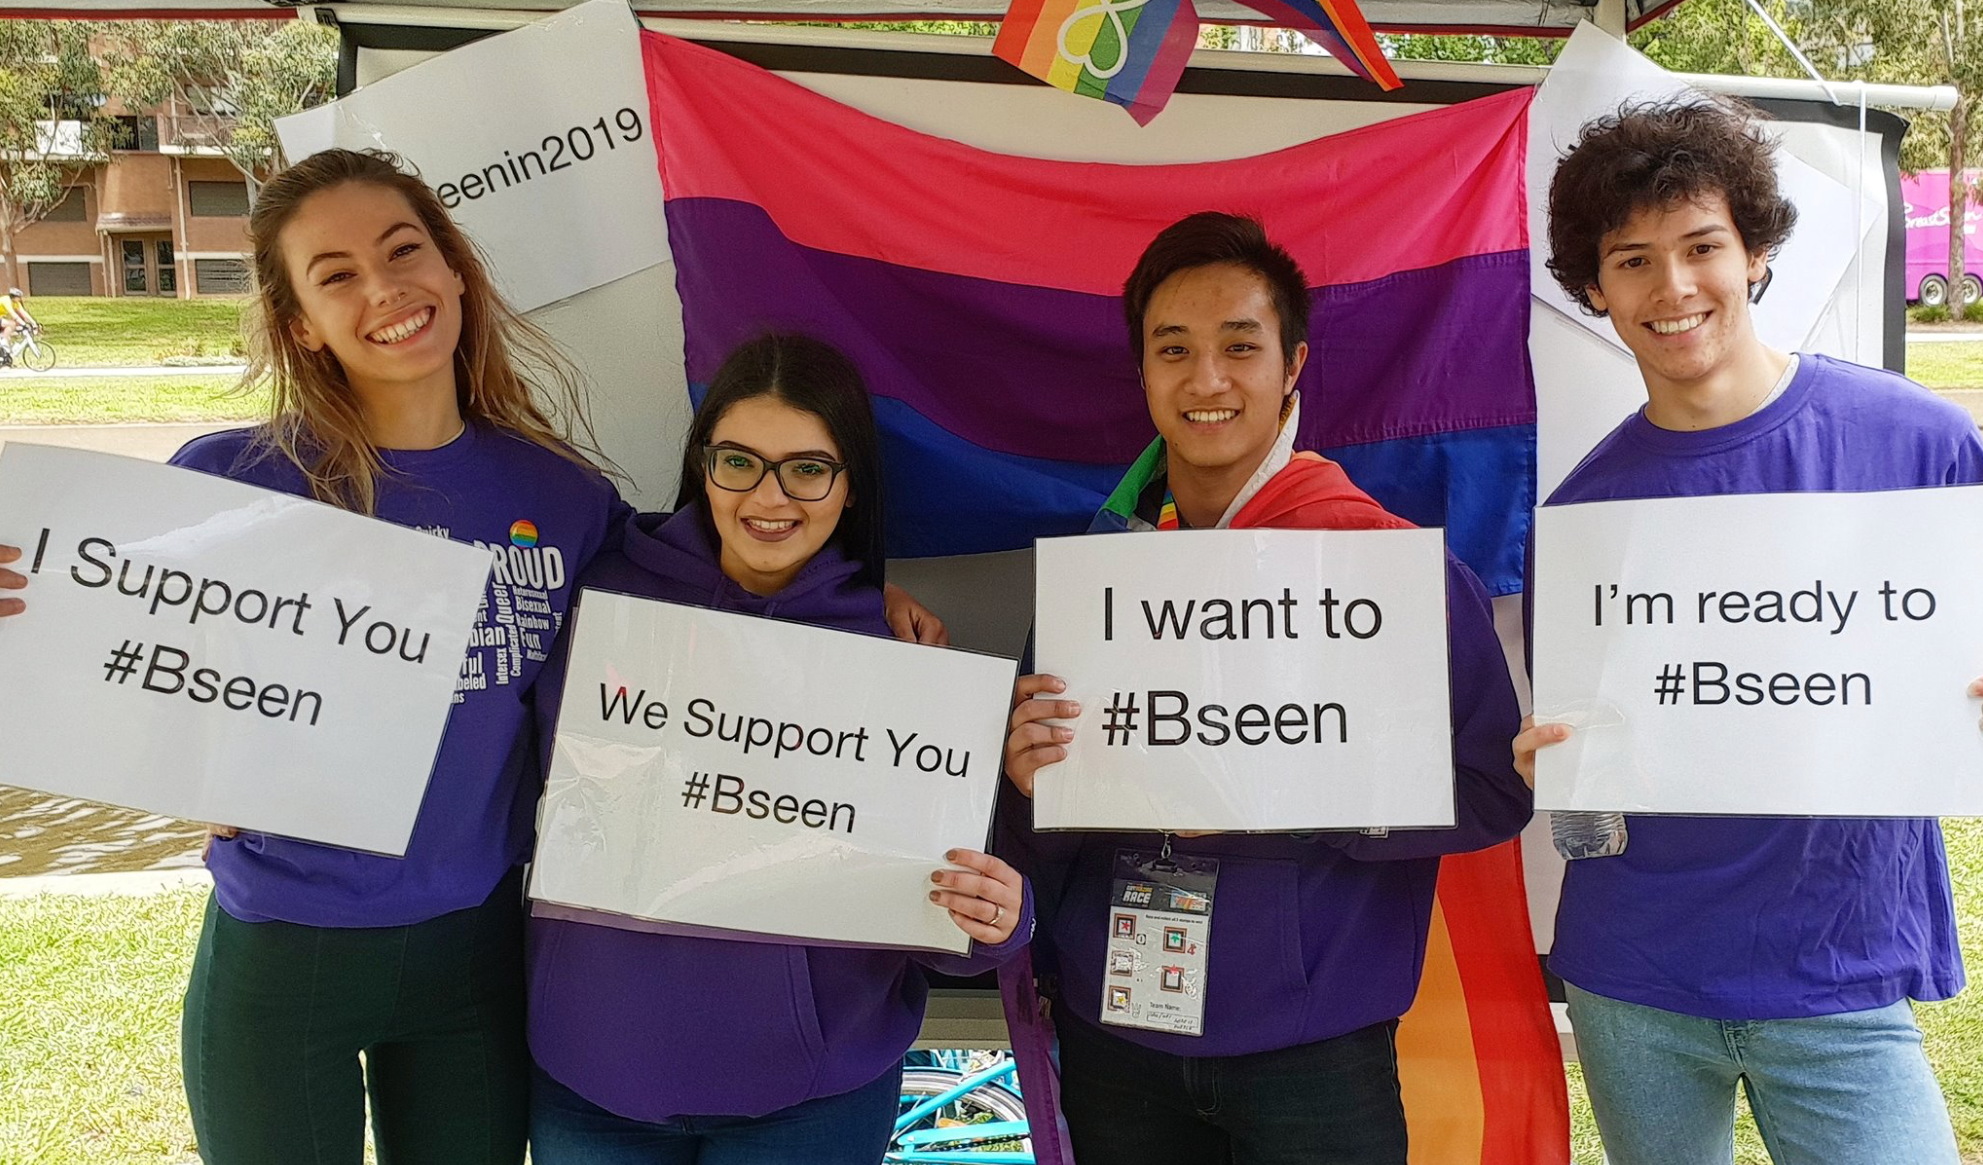 Bisexual groups launch national campaign to raise visibility and mental health awareness